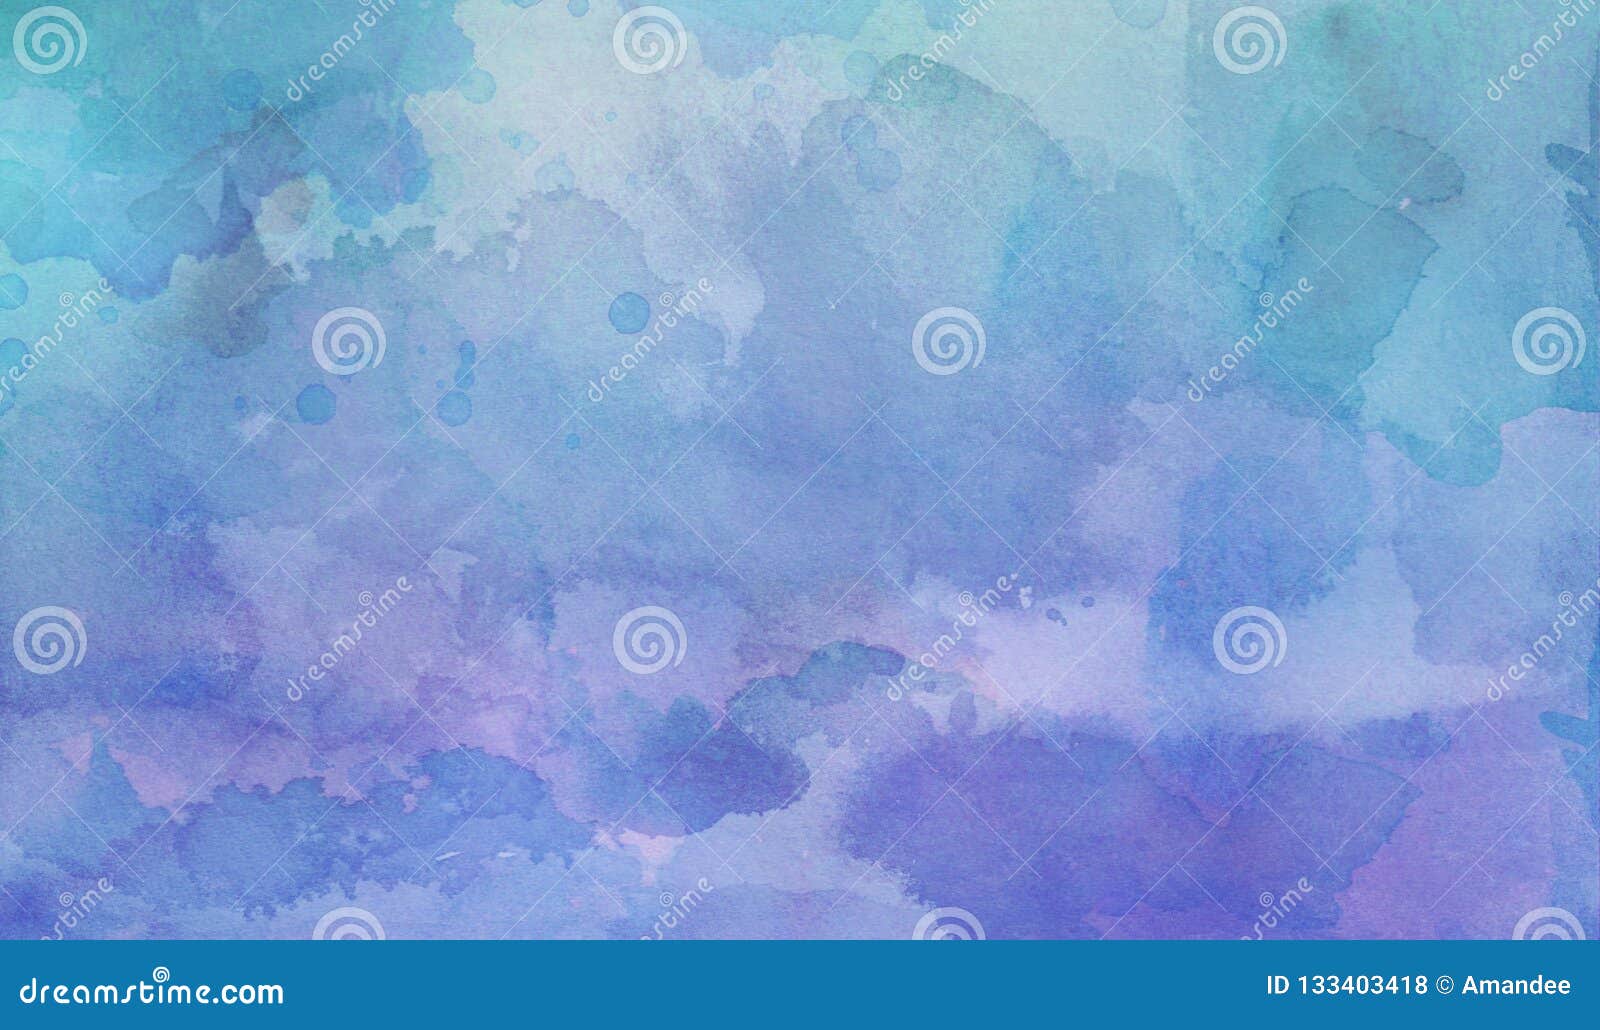 purple and blue green watercolor wash background with fringe bleed and bloom blotches in grainy watercolor paint on paper texture